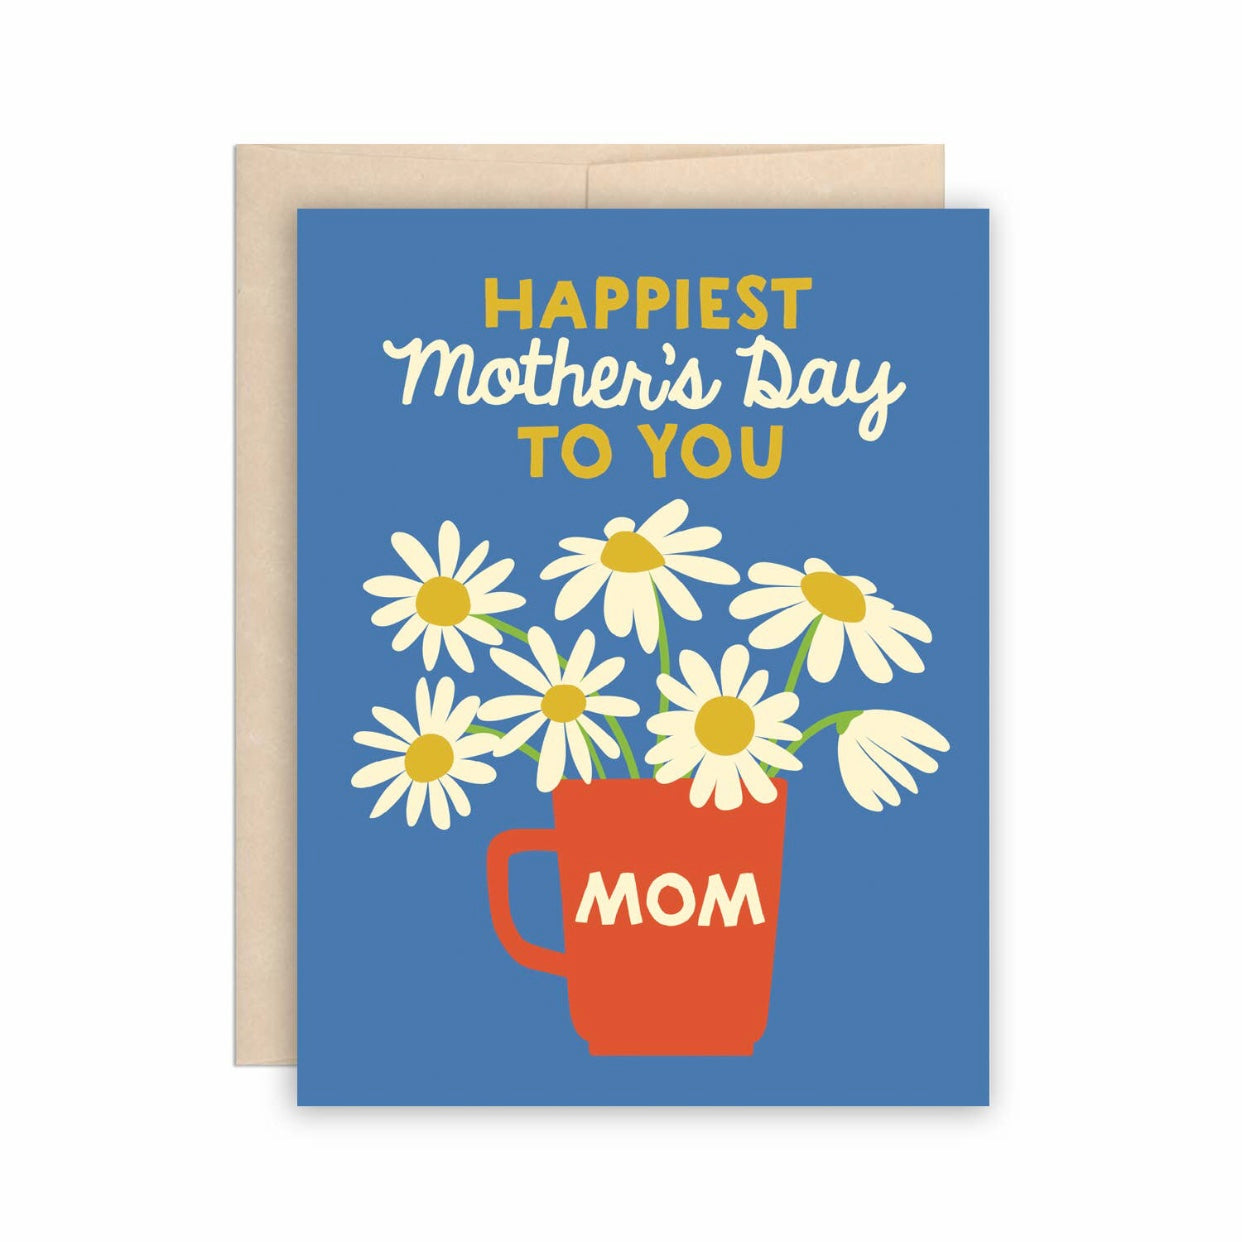 Happiest Mother's day greeting card